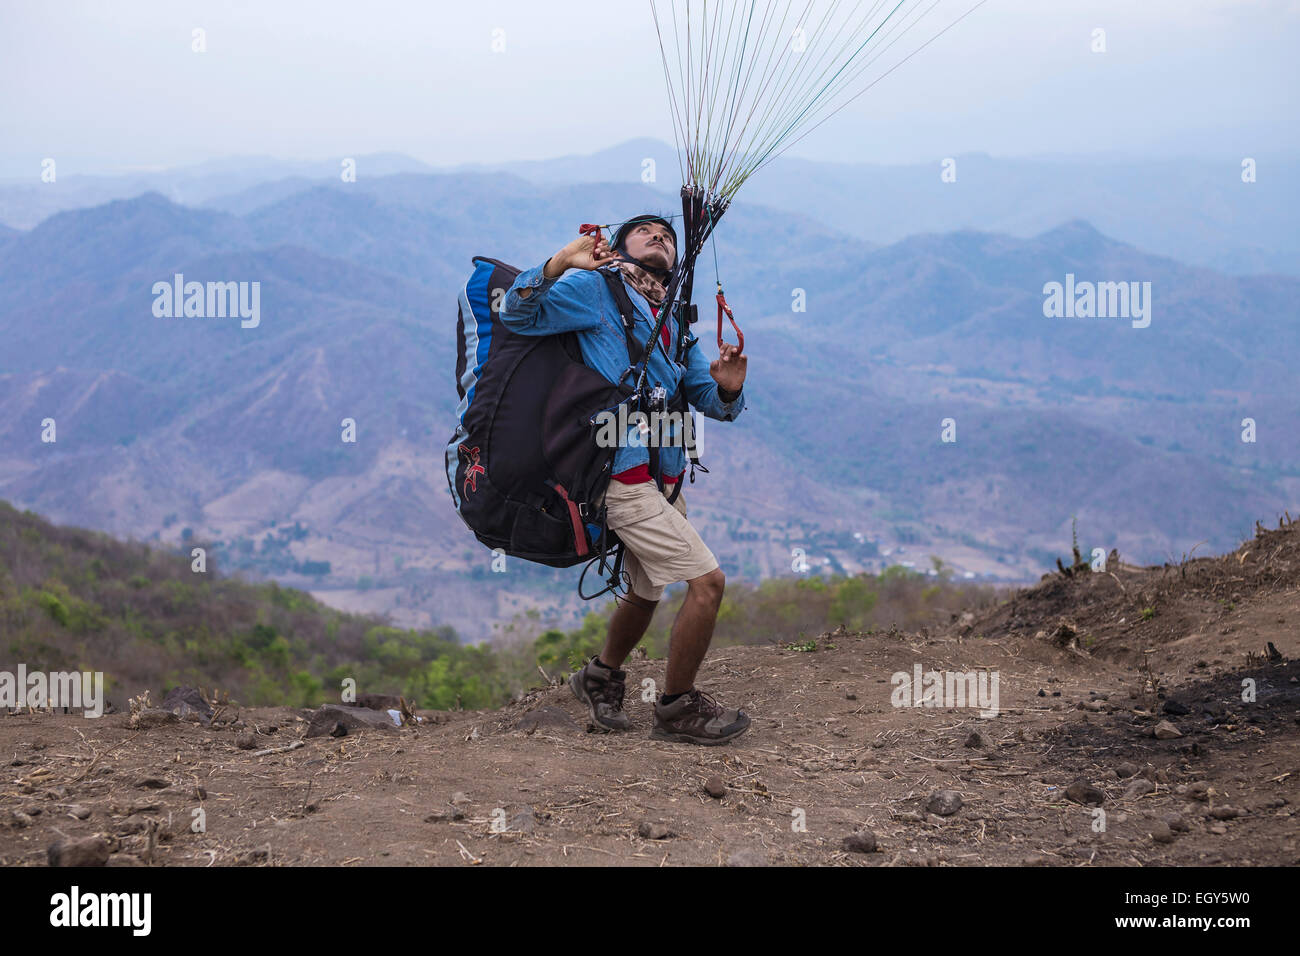 Paragliding in Indonesien, West Sumabawa. Stockfoto